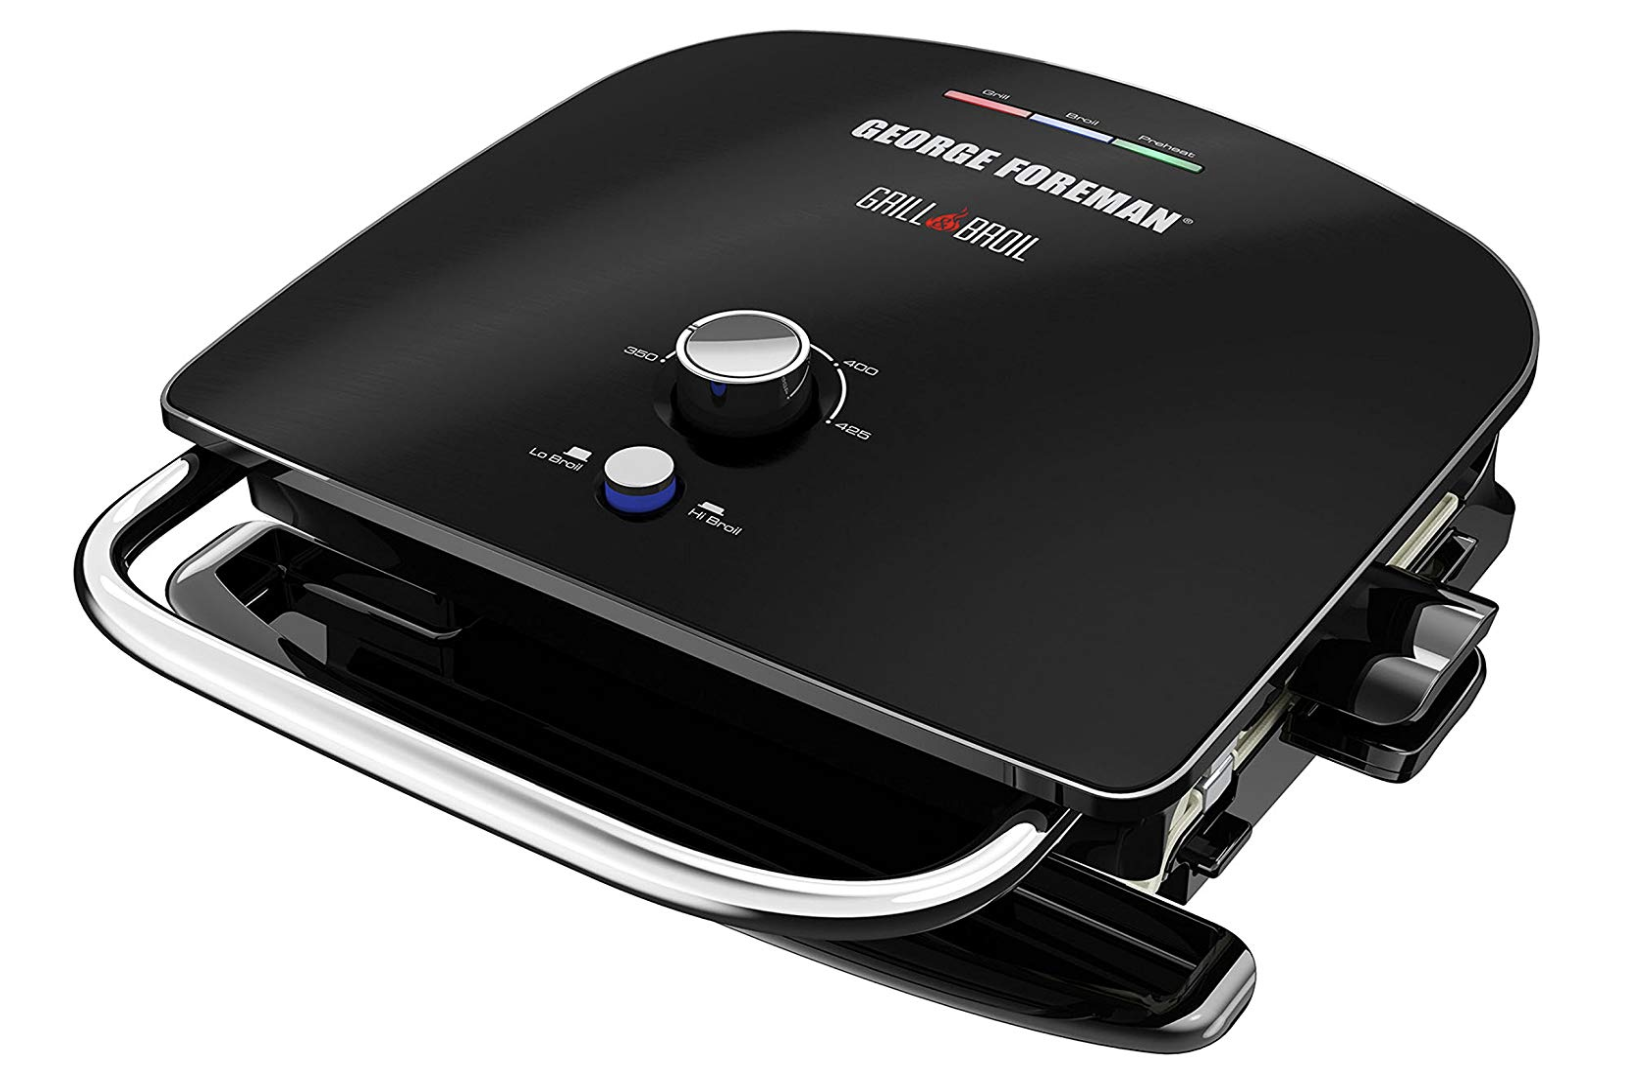 George Forman Grill & Broil 7-in-1 Electric Indoor Grill